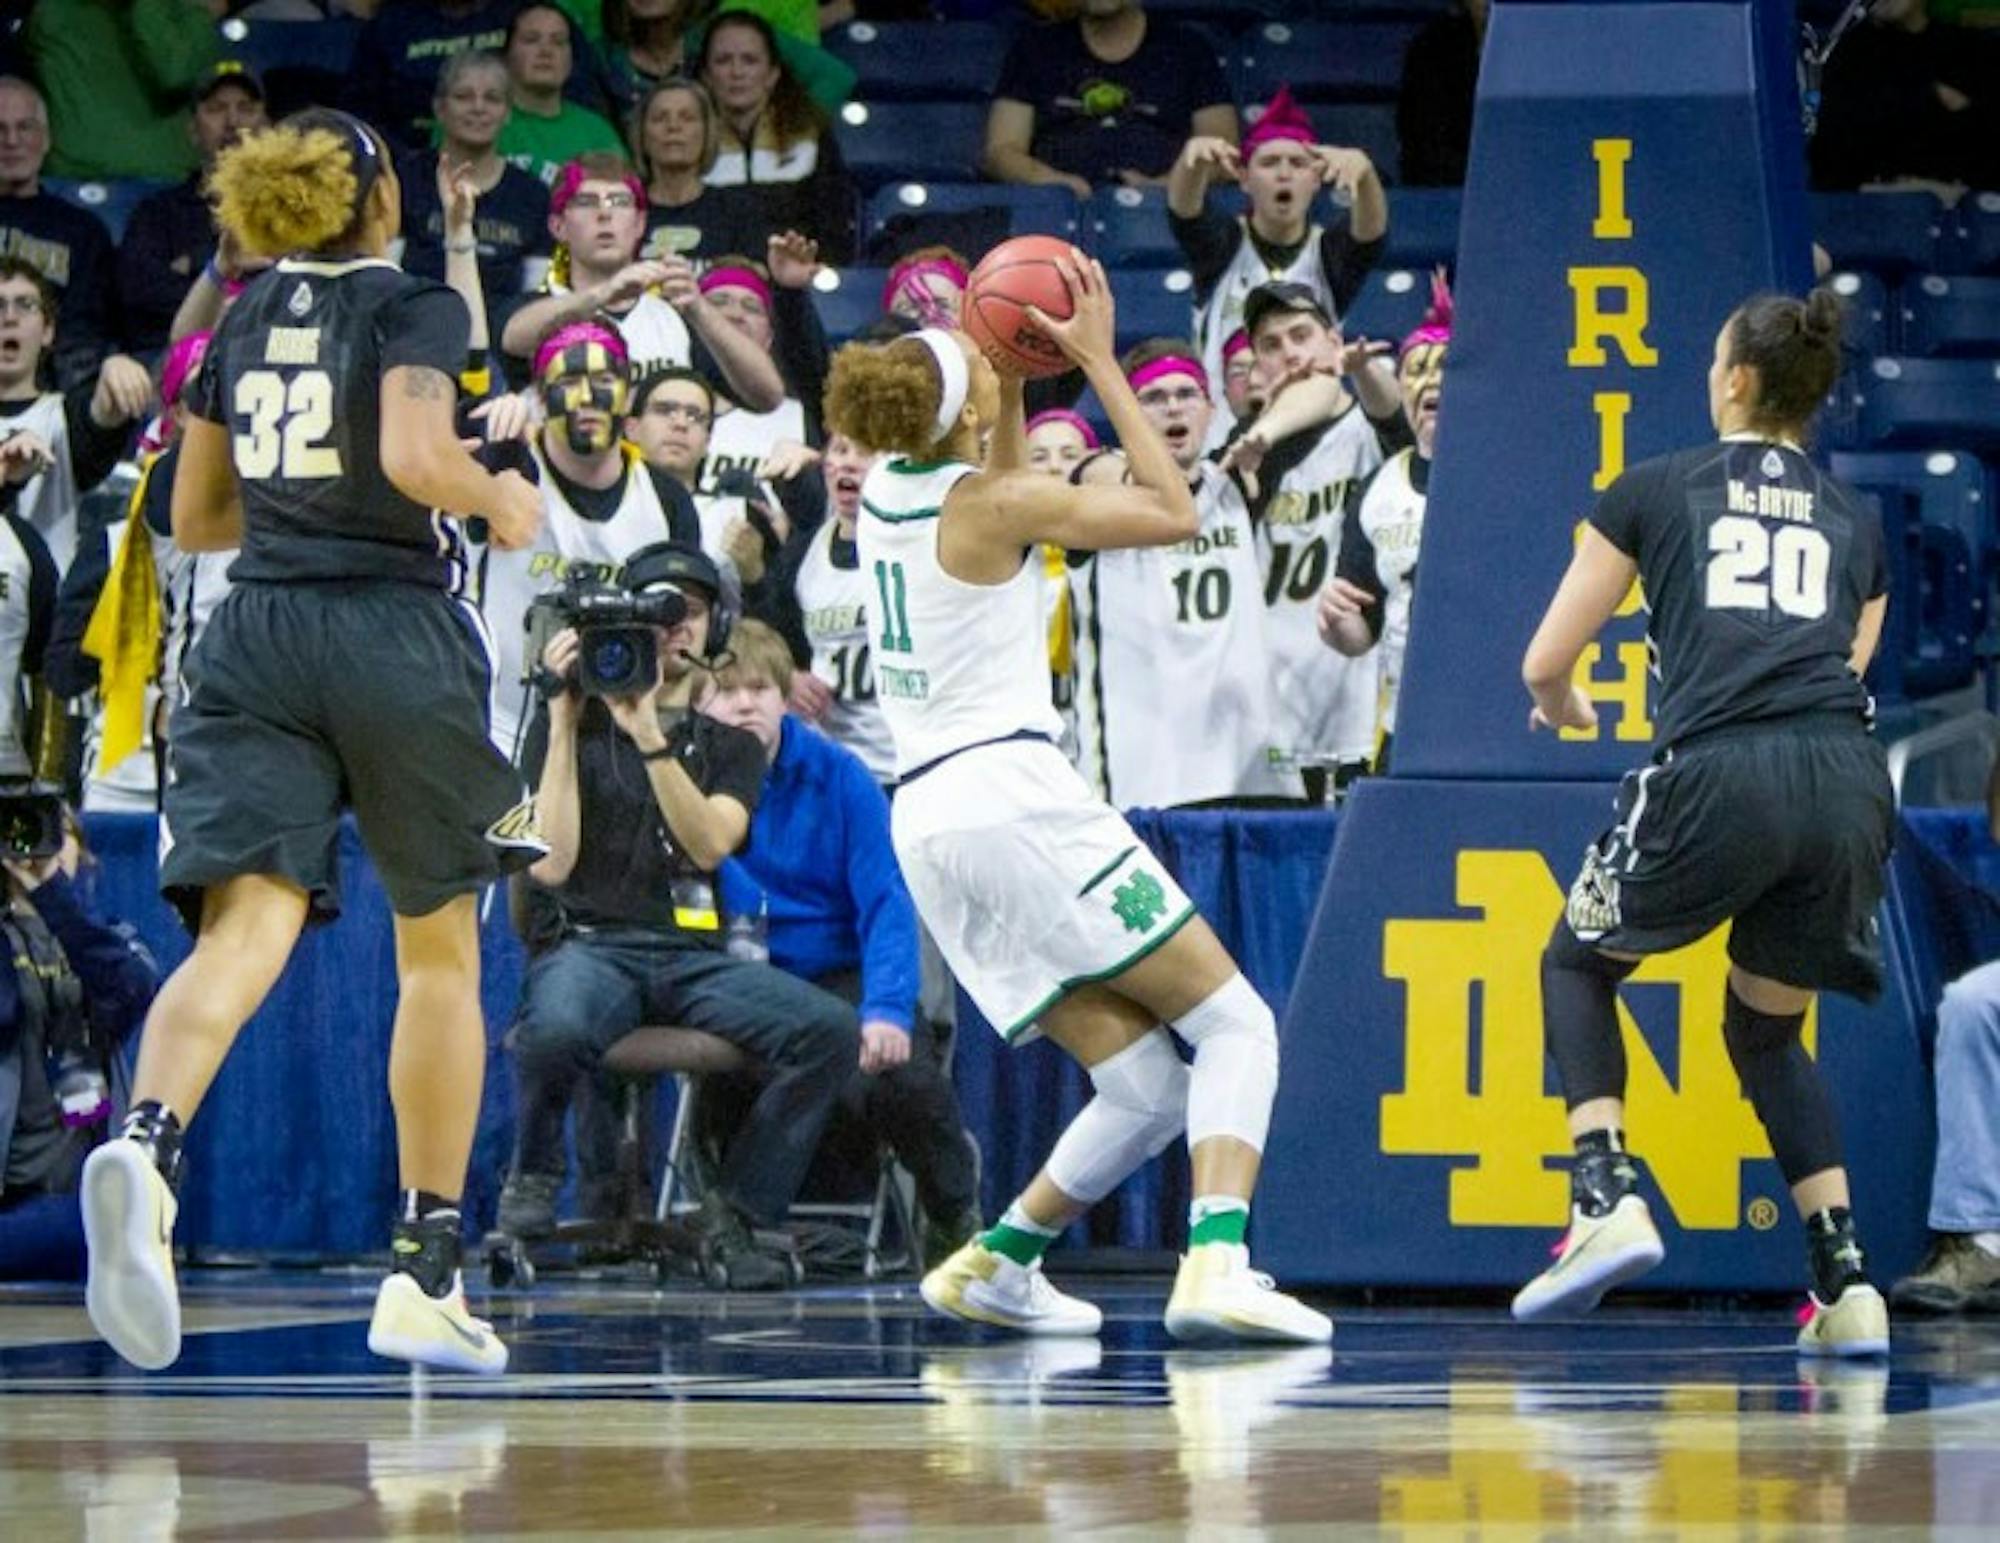 Irish junior forward Brianna Turner catches a pass and looks towards the basket during Notre Dame’s 88-82 win over Purdue on Sunday at Purcell Pavilion. Turner injured her left knee on the play, and she is scheduled for an MRI on Monday.